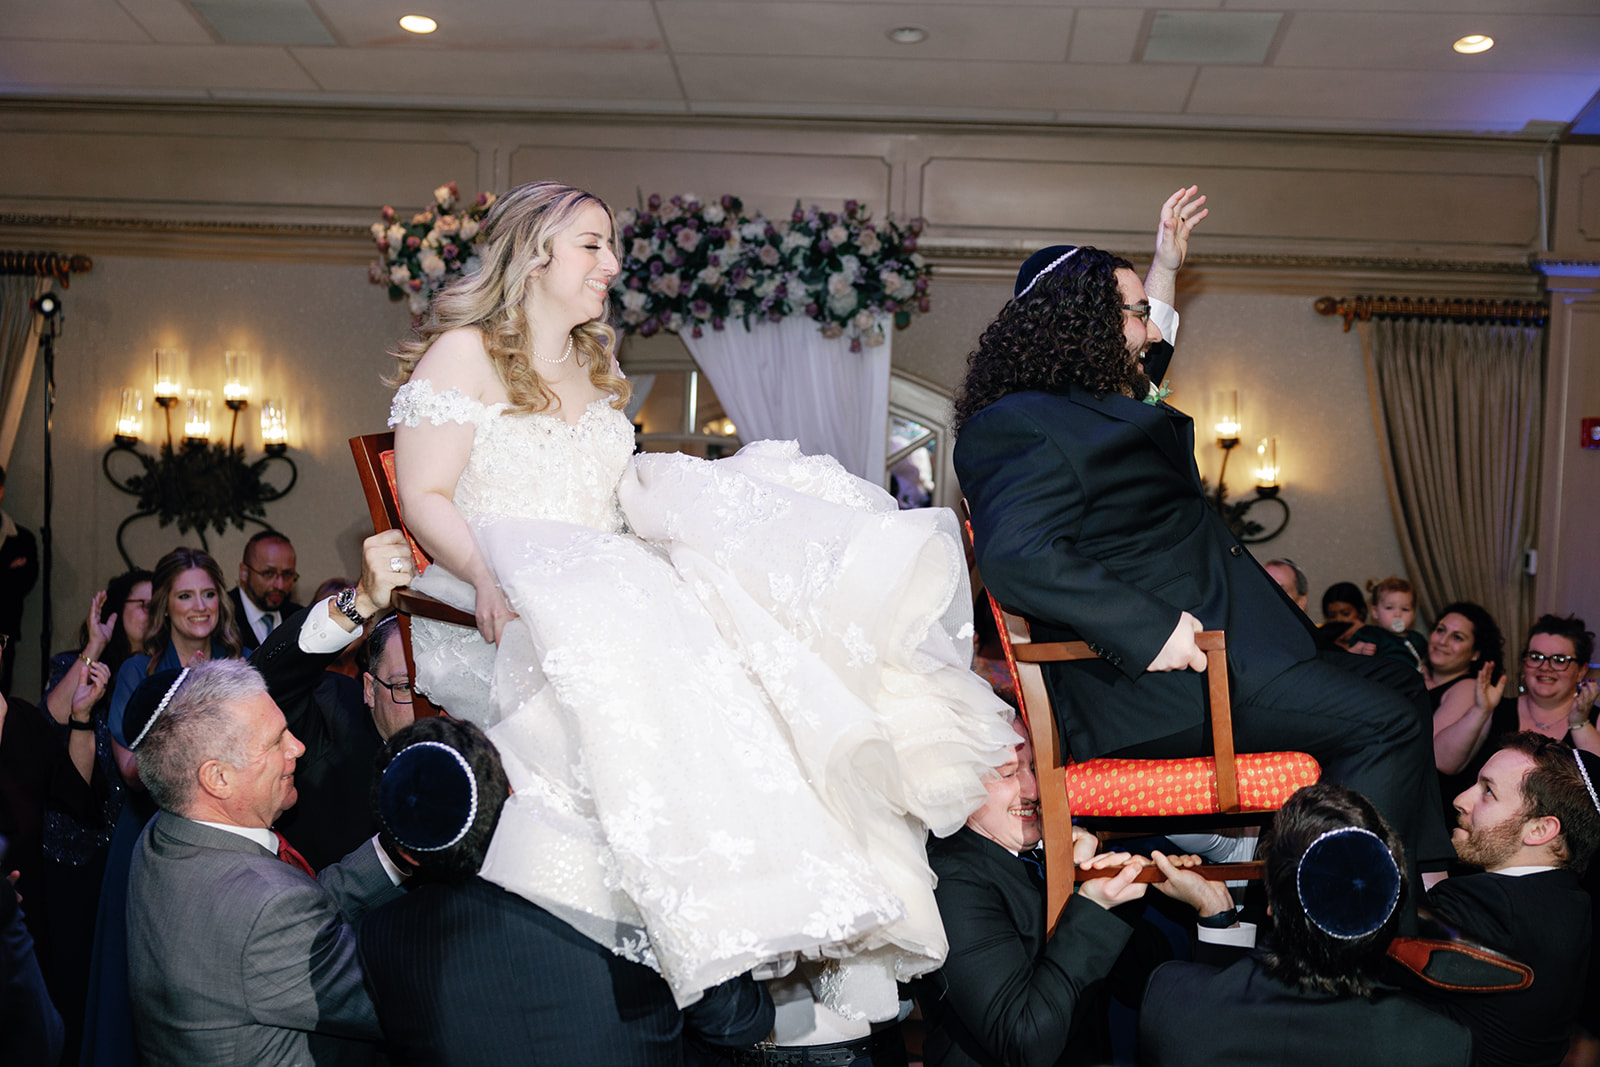 Newlyweds laugh and celebrate while being lifted on chairs at their Crest Hollow Country Club Wedding reception